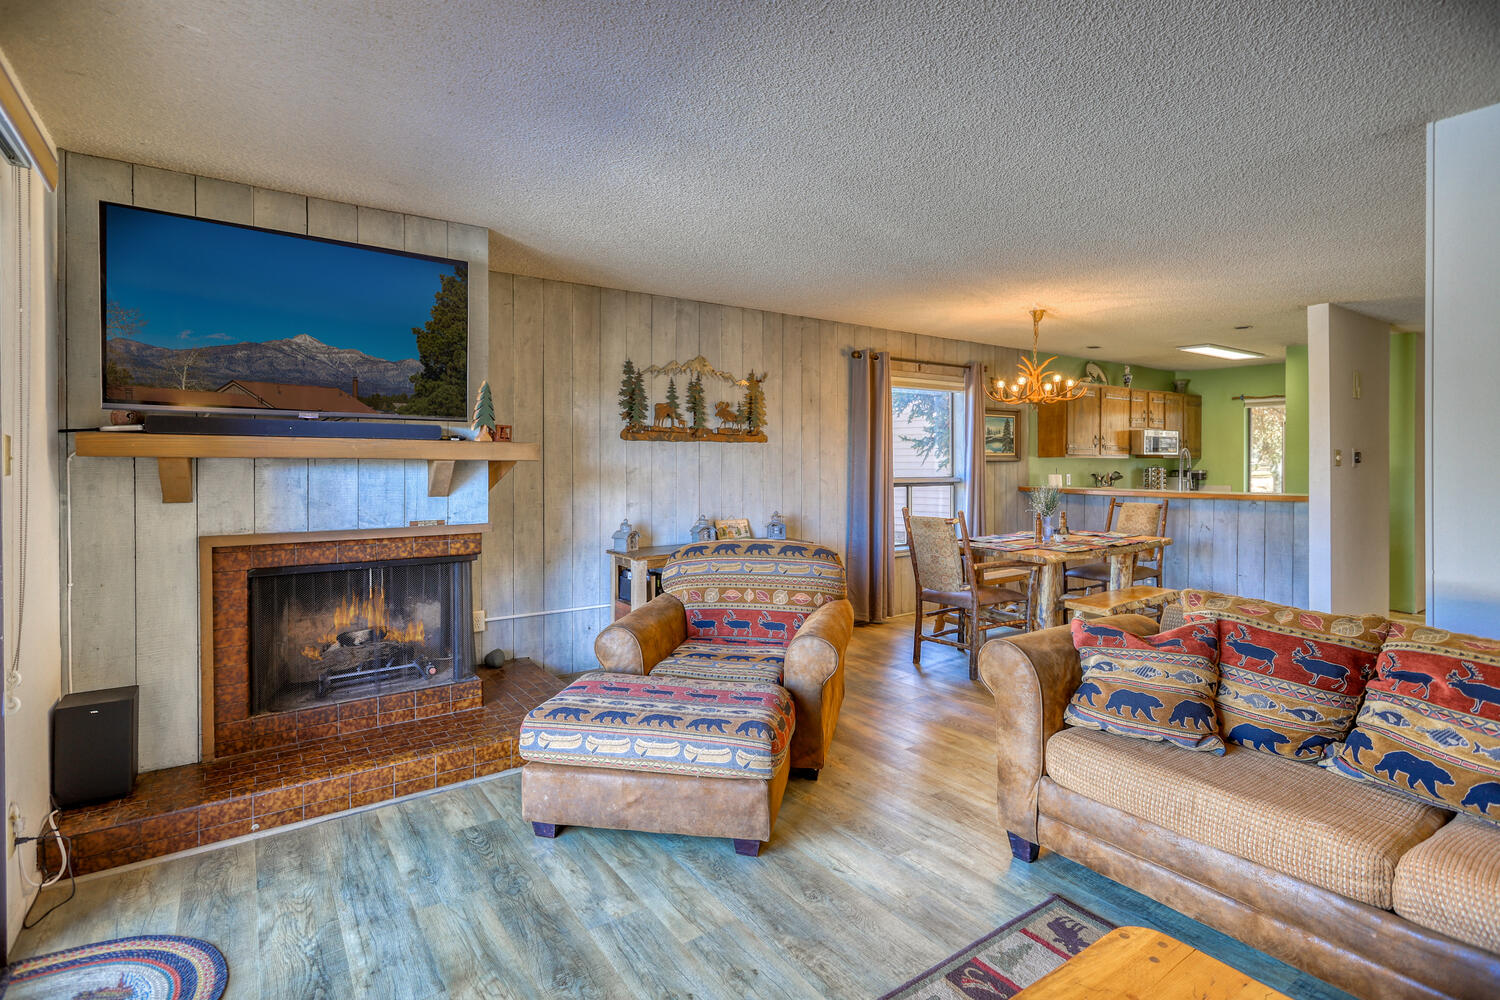 NeverLeaf Condo Vacation Rental in Uptown Pagosa Springs, CO